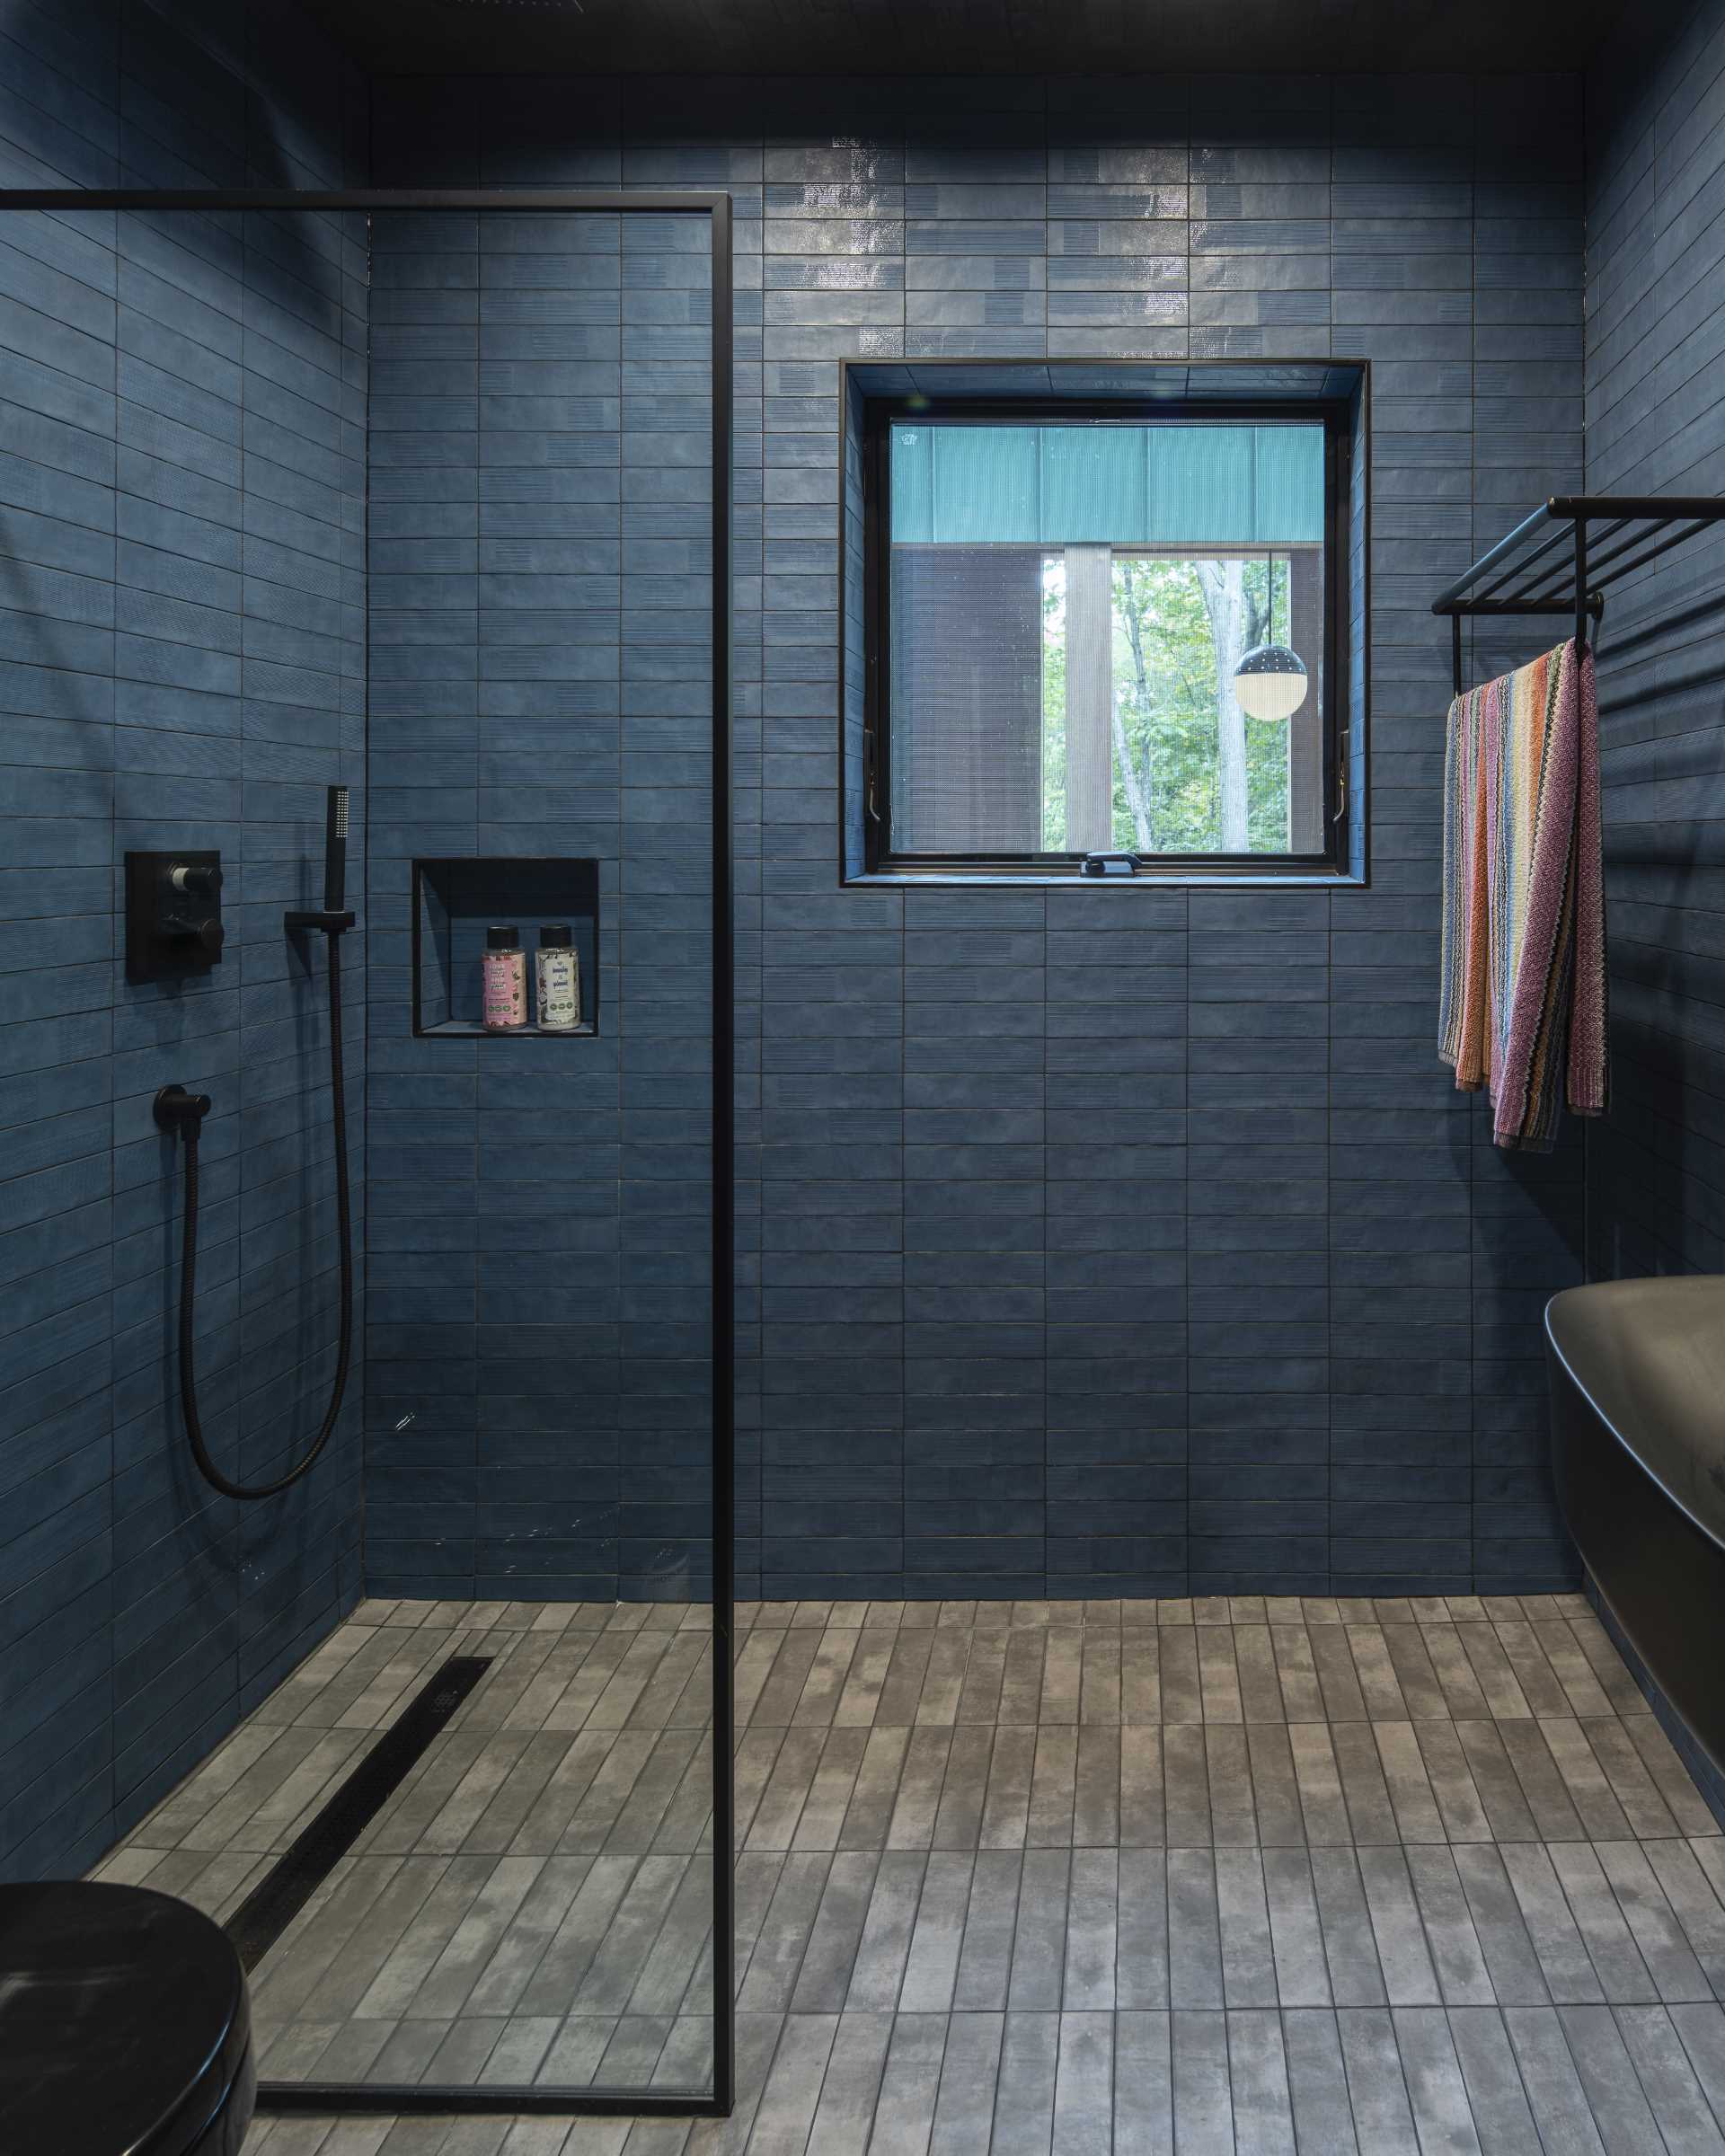 In this modern bathroom, blue tiles line the walls, grey tiles line the floor, and accents of black provide a contrasting element.